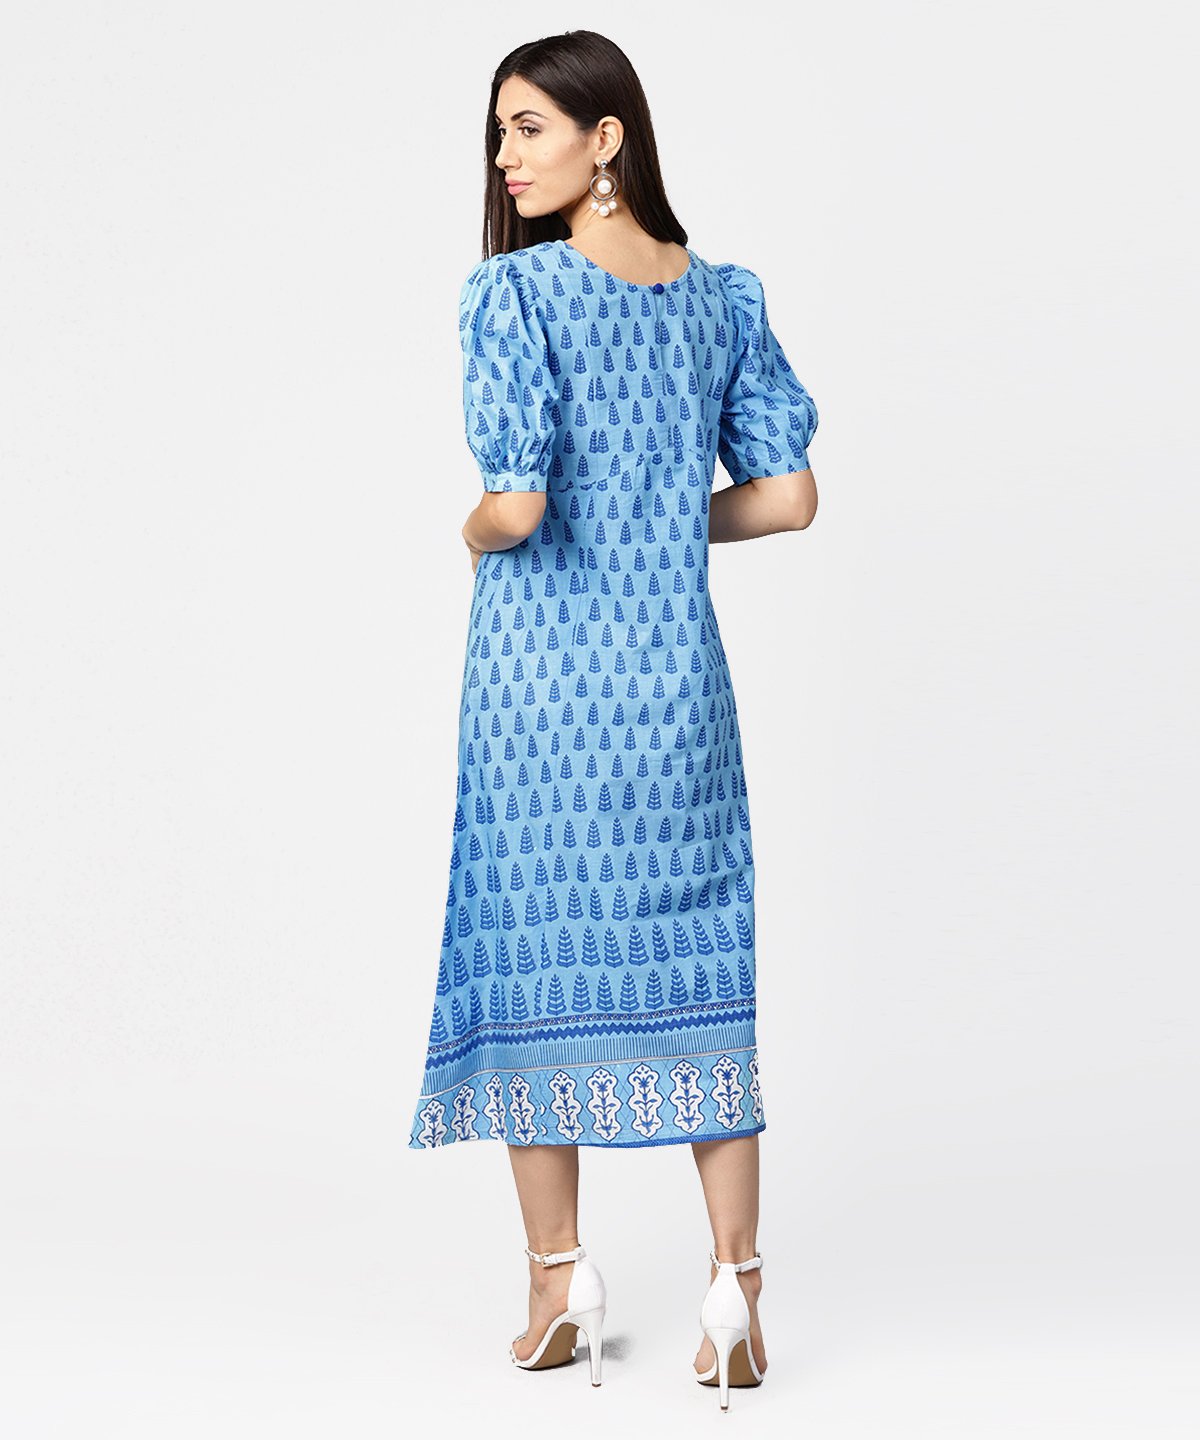 Women's Blue Printed Ballon Style Puff Sleeve Cotton A-Line Dress - Nayo Clothing